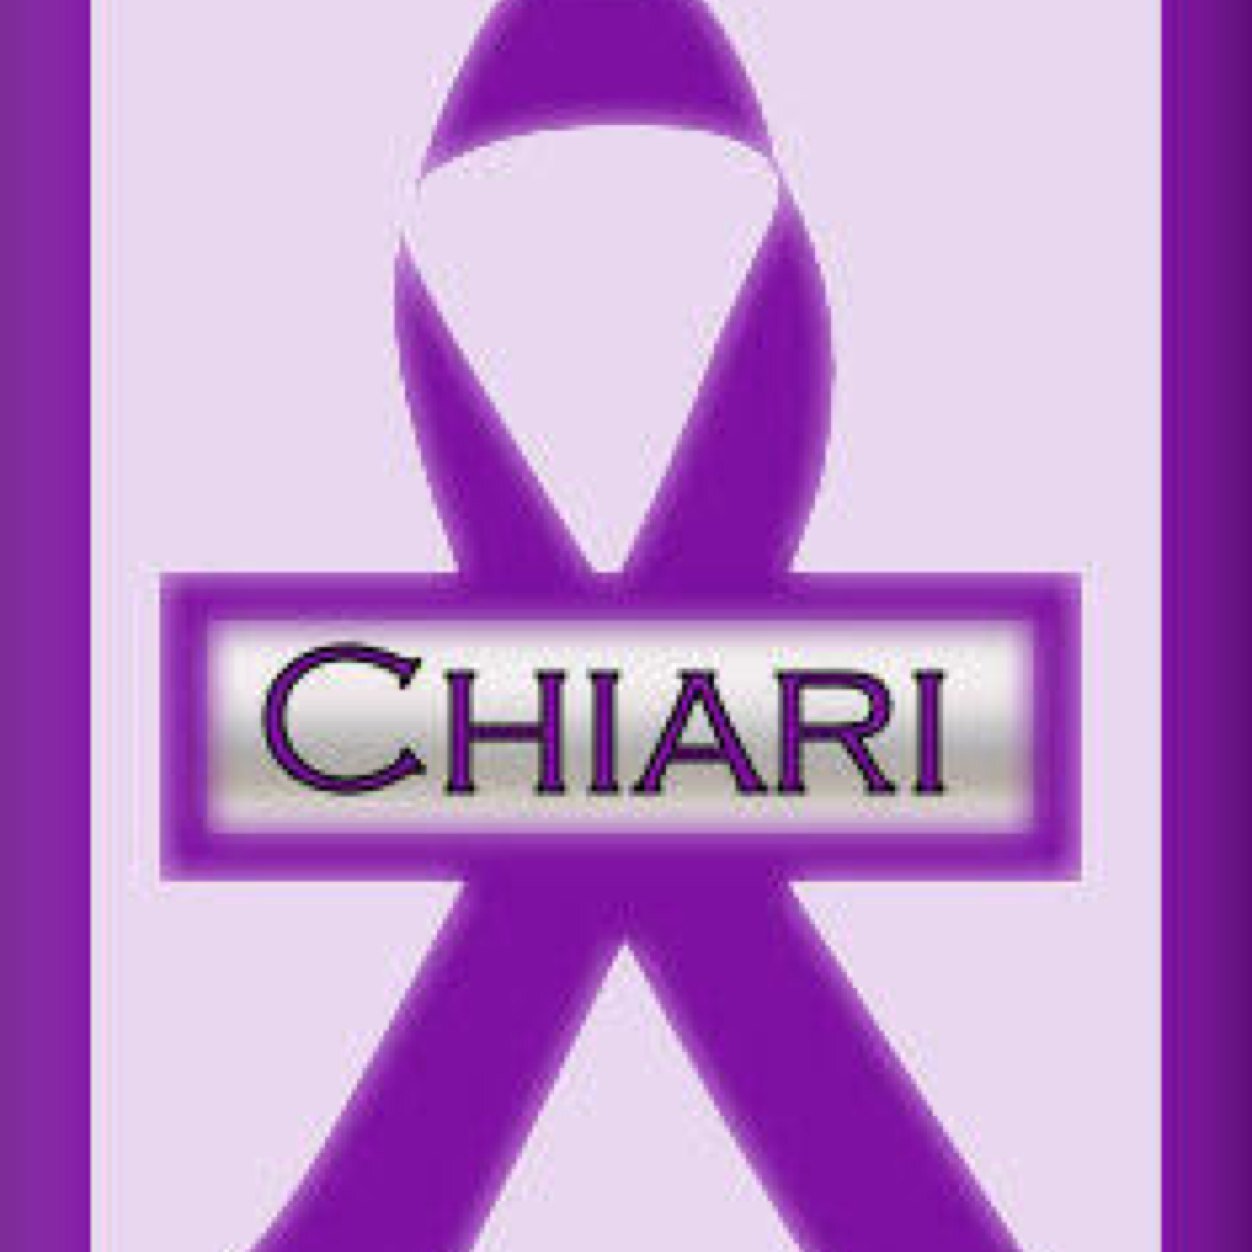 If you or a loved one have Chiari, follow this page. Tag me in things about Chiari. Lets stick together and show our support for those with Chiari Malformation.